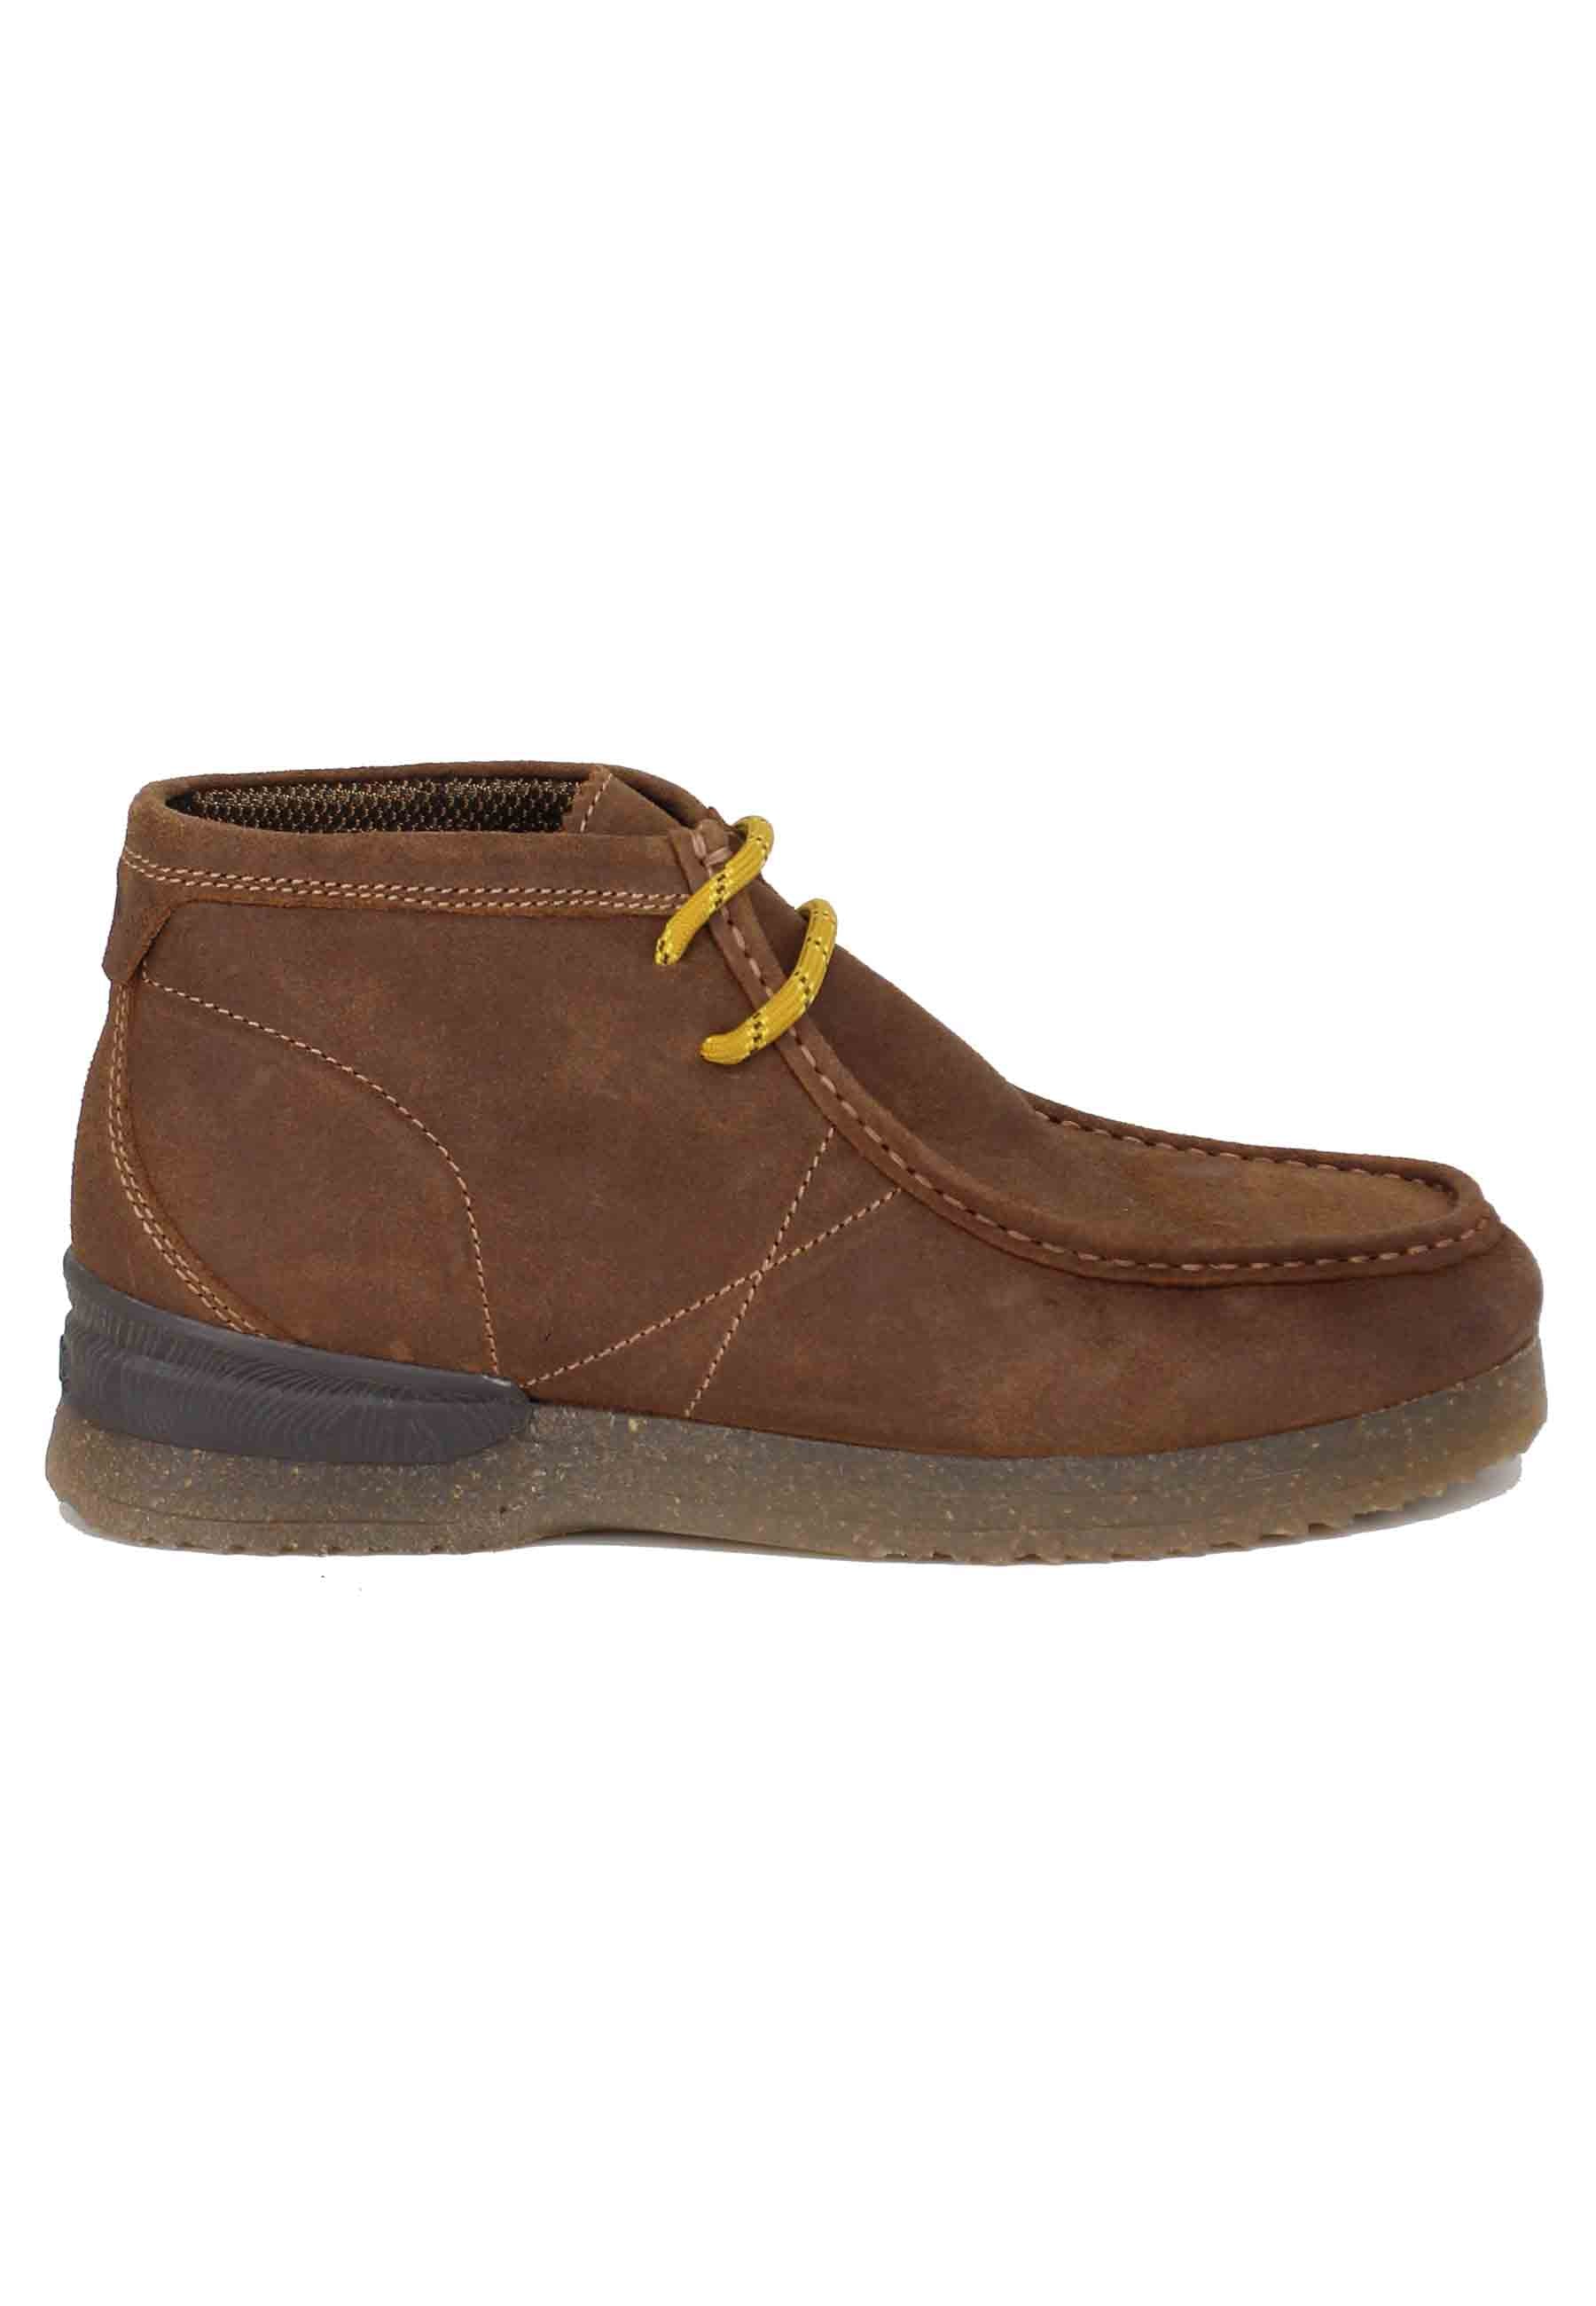 Men's ankle boots in leather suede with Bantam crepe sole